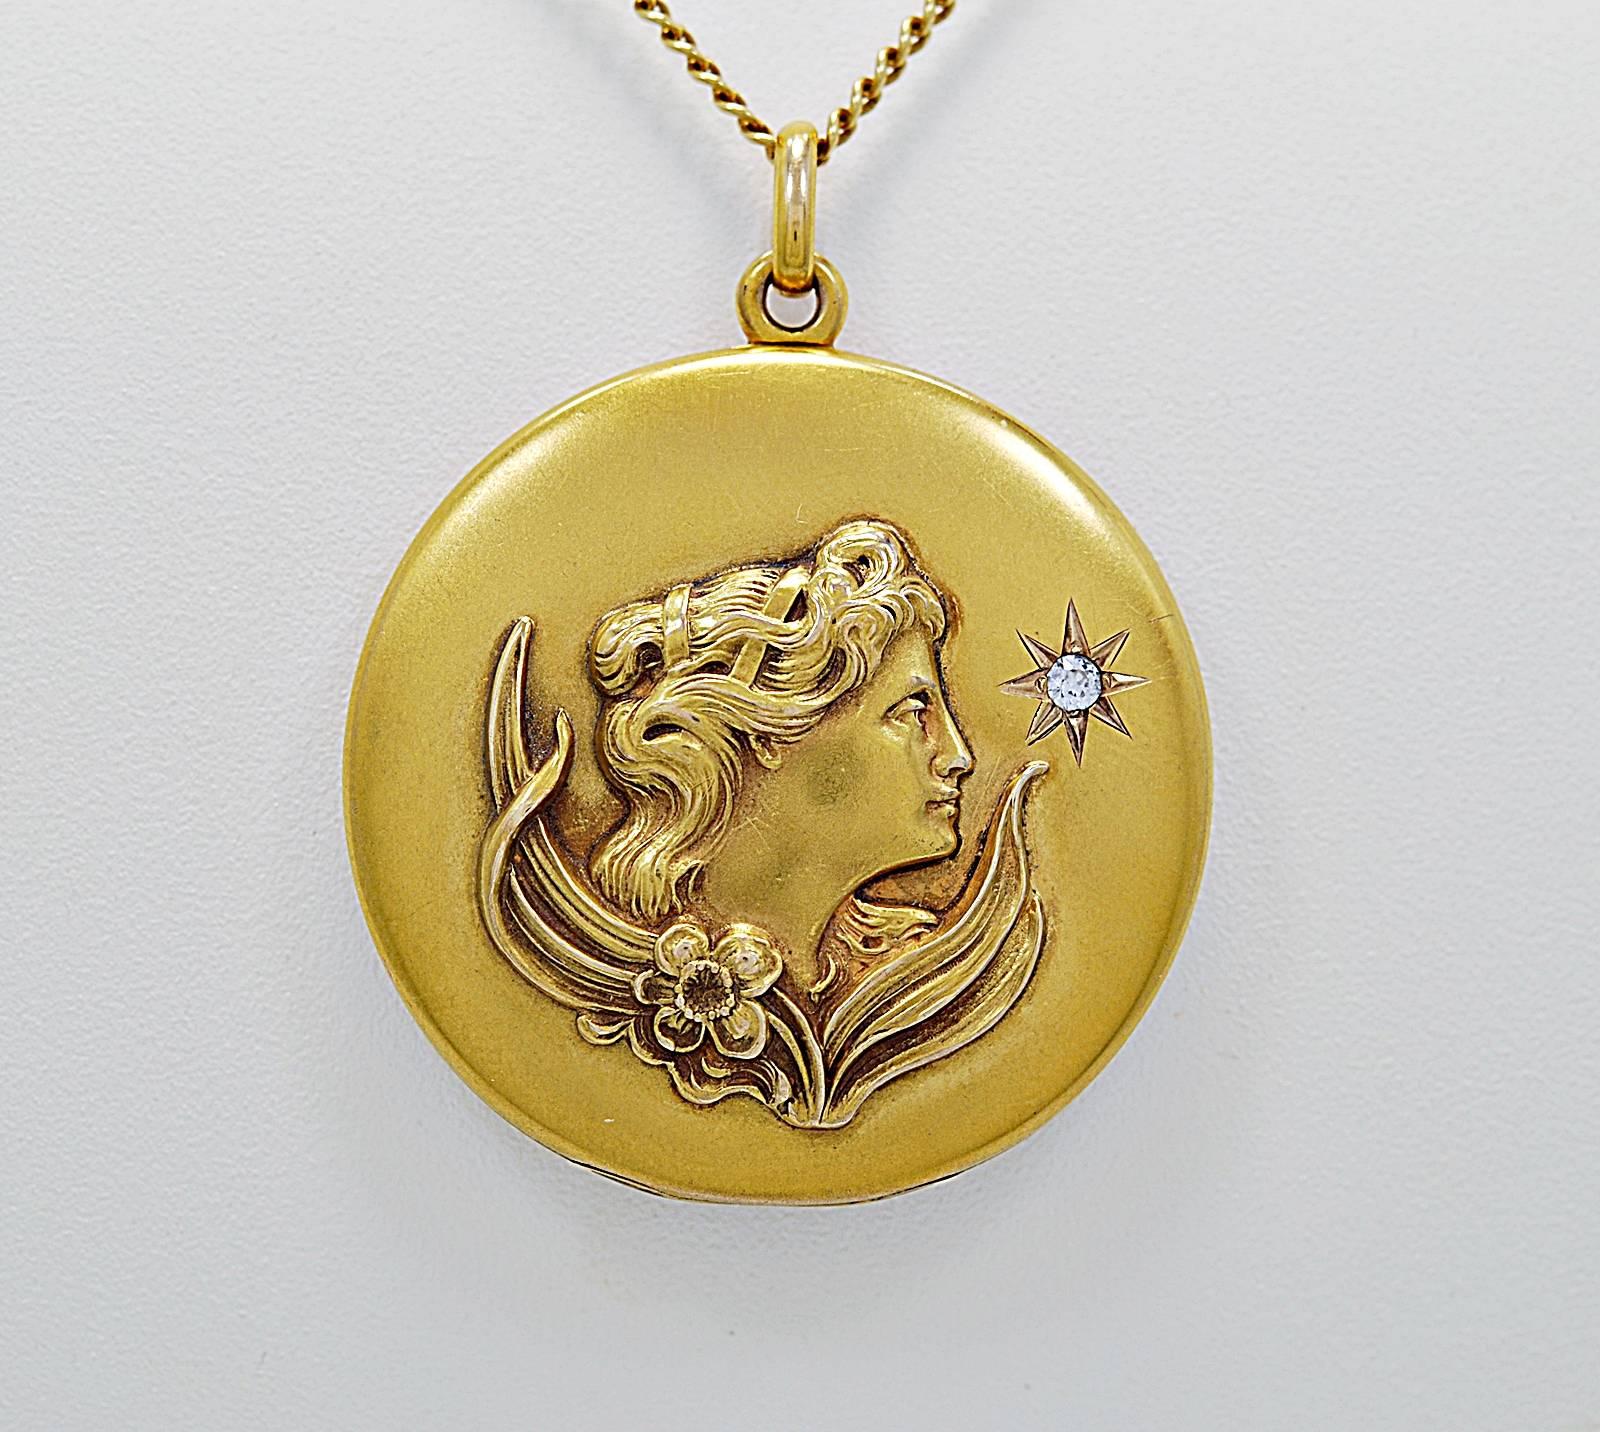 An Art Nouveau locket featuring an Art Nouveau ladies profile with leaves, a flower and a .08ct. diamond with I1 clarity (100% eye clean) and H color. This magnificent piece of artwork is created in rich 14K yellow gold with a 21